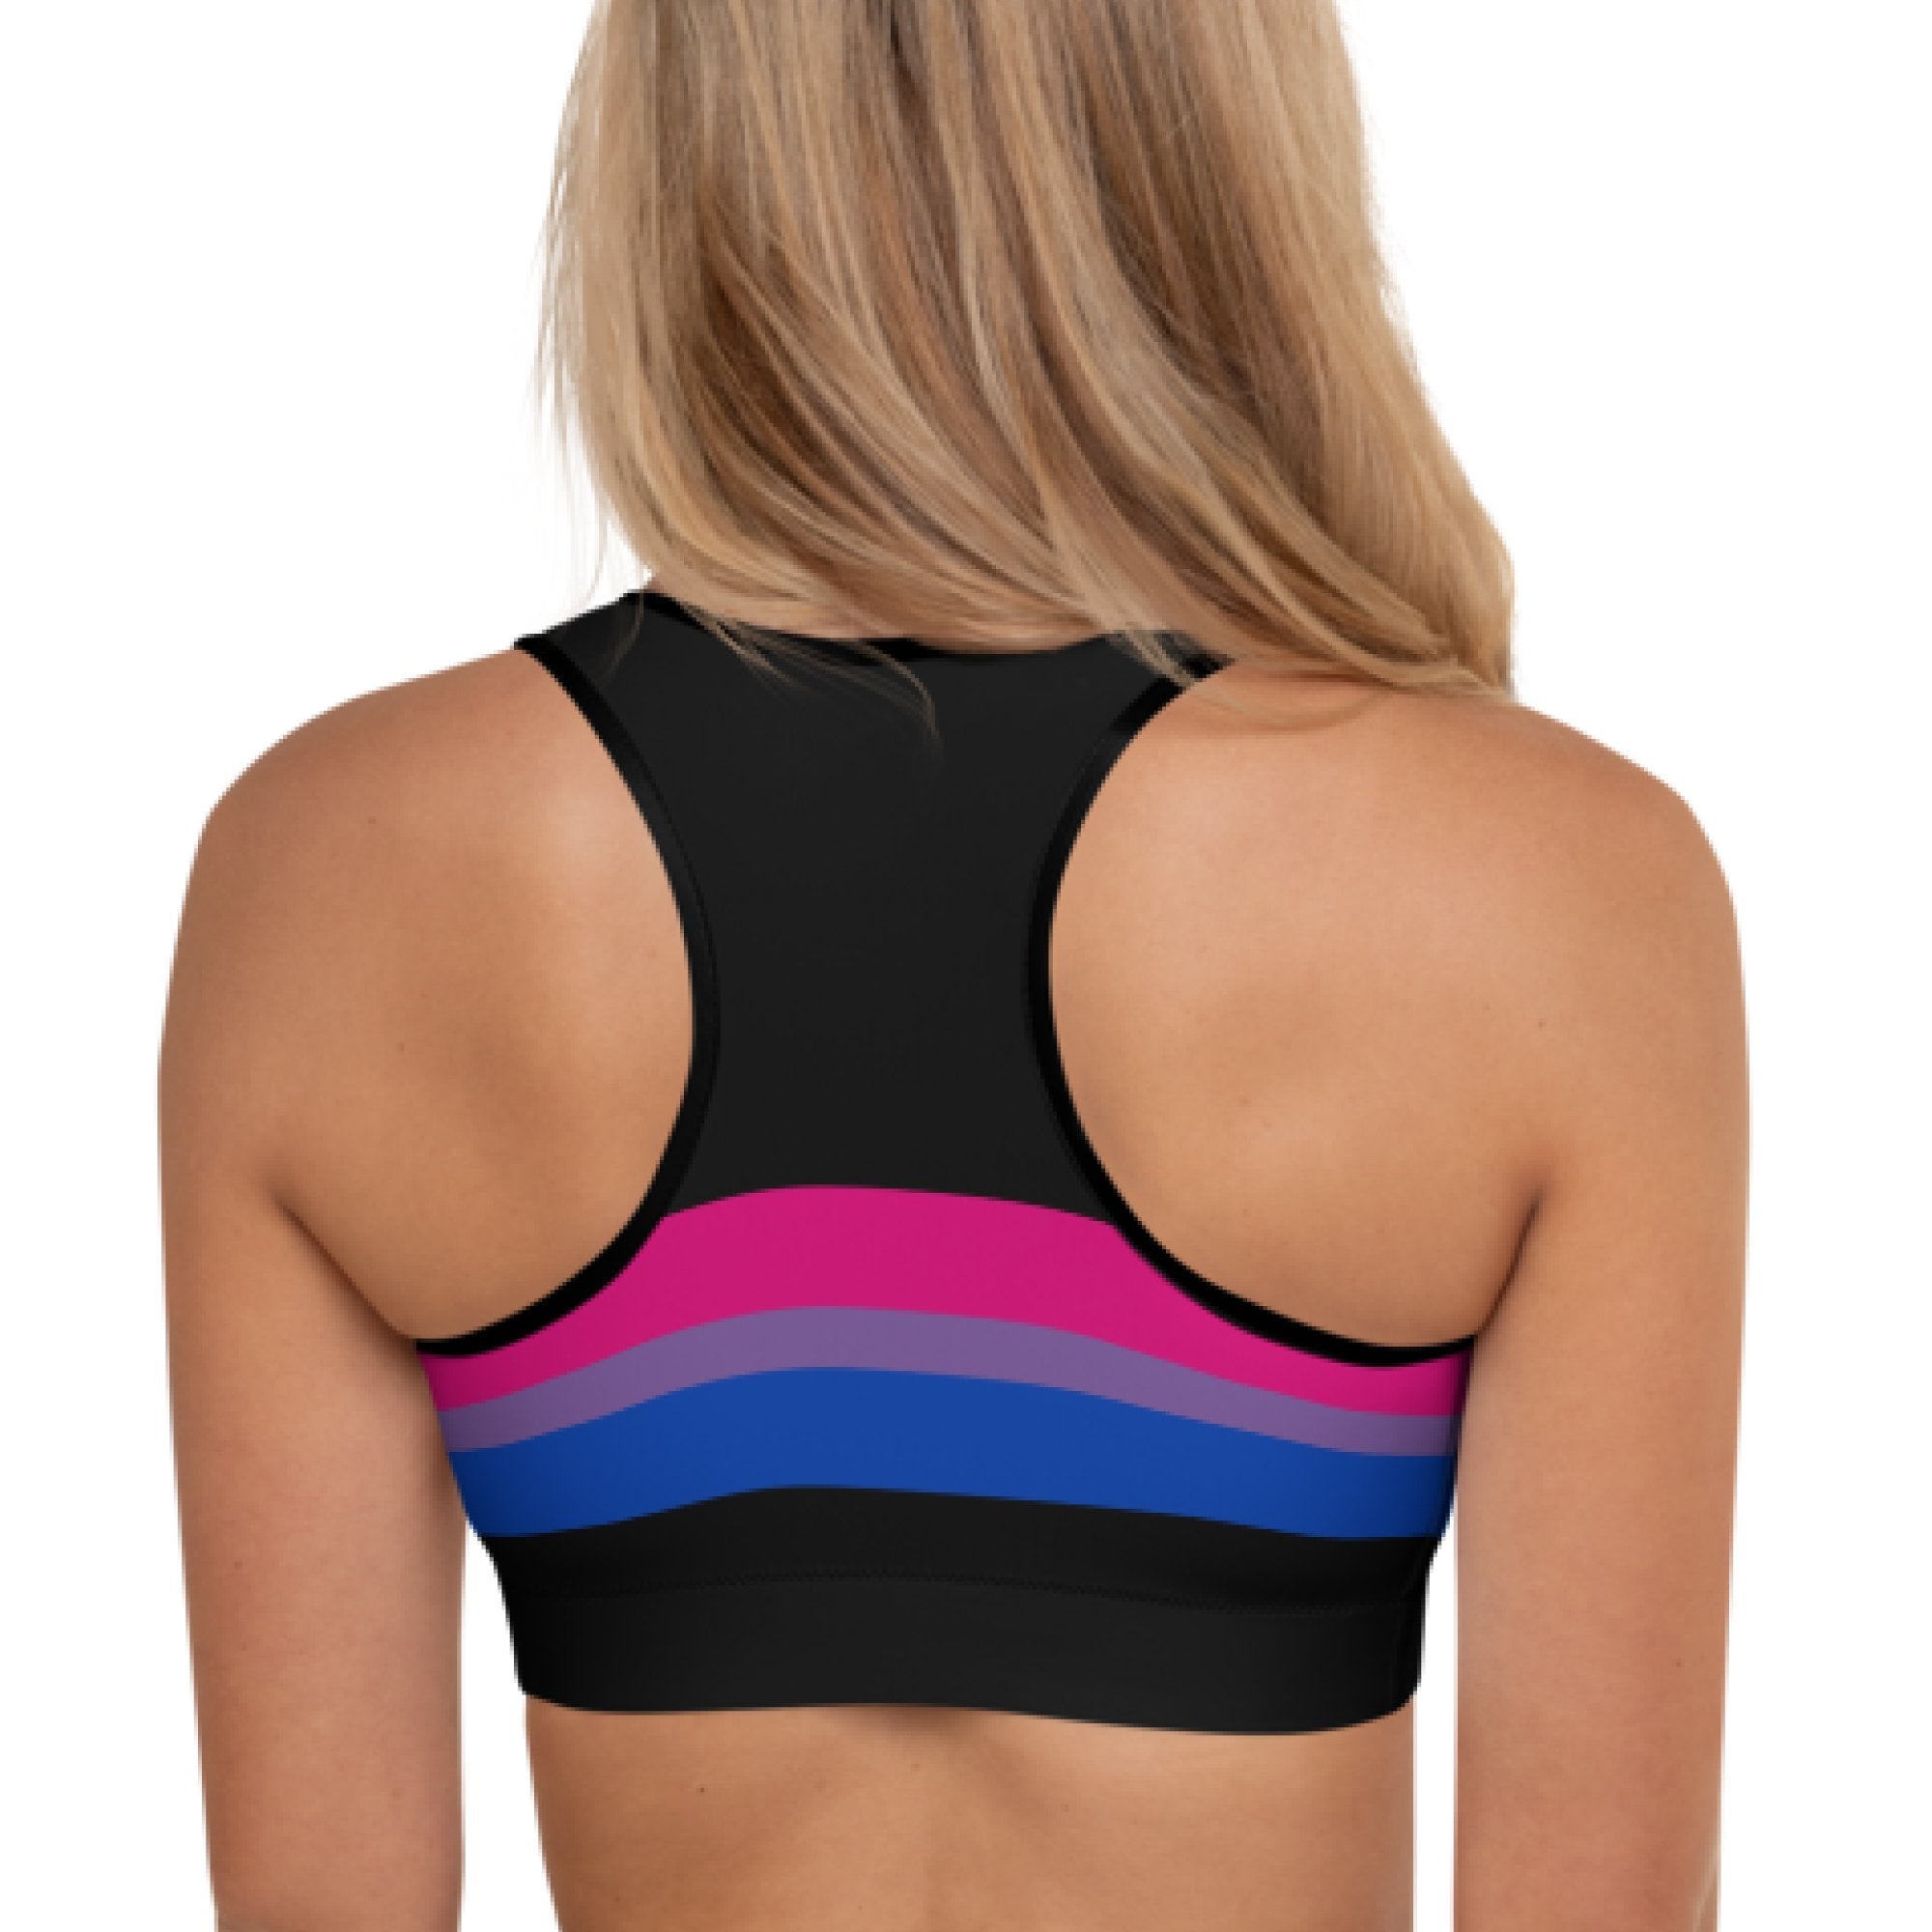  Bisexual Pride Flag Workout Sets for Women Sexy 2 Piece Yoga  Outfits High Waist Gym Sports Bra S : Clothing, Shoes & Jewelry